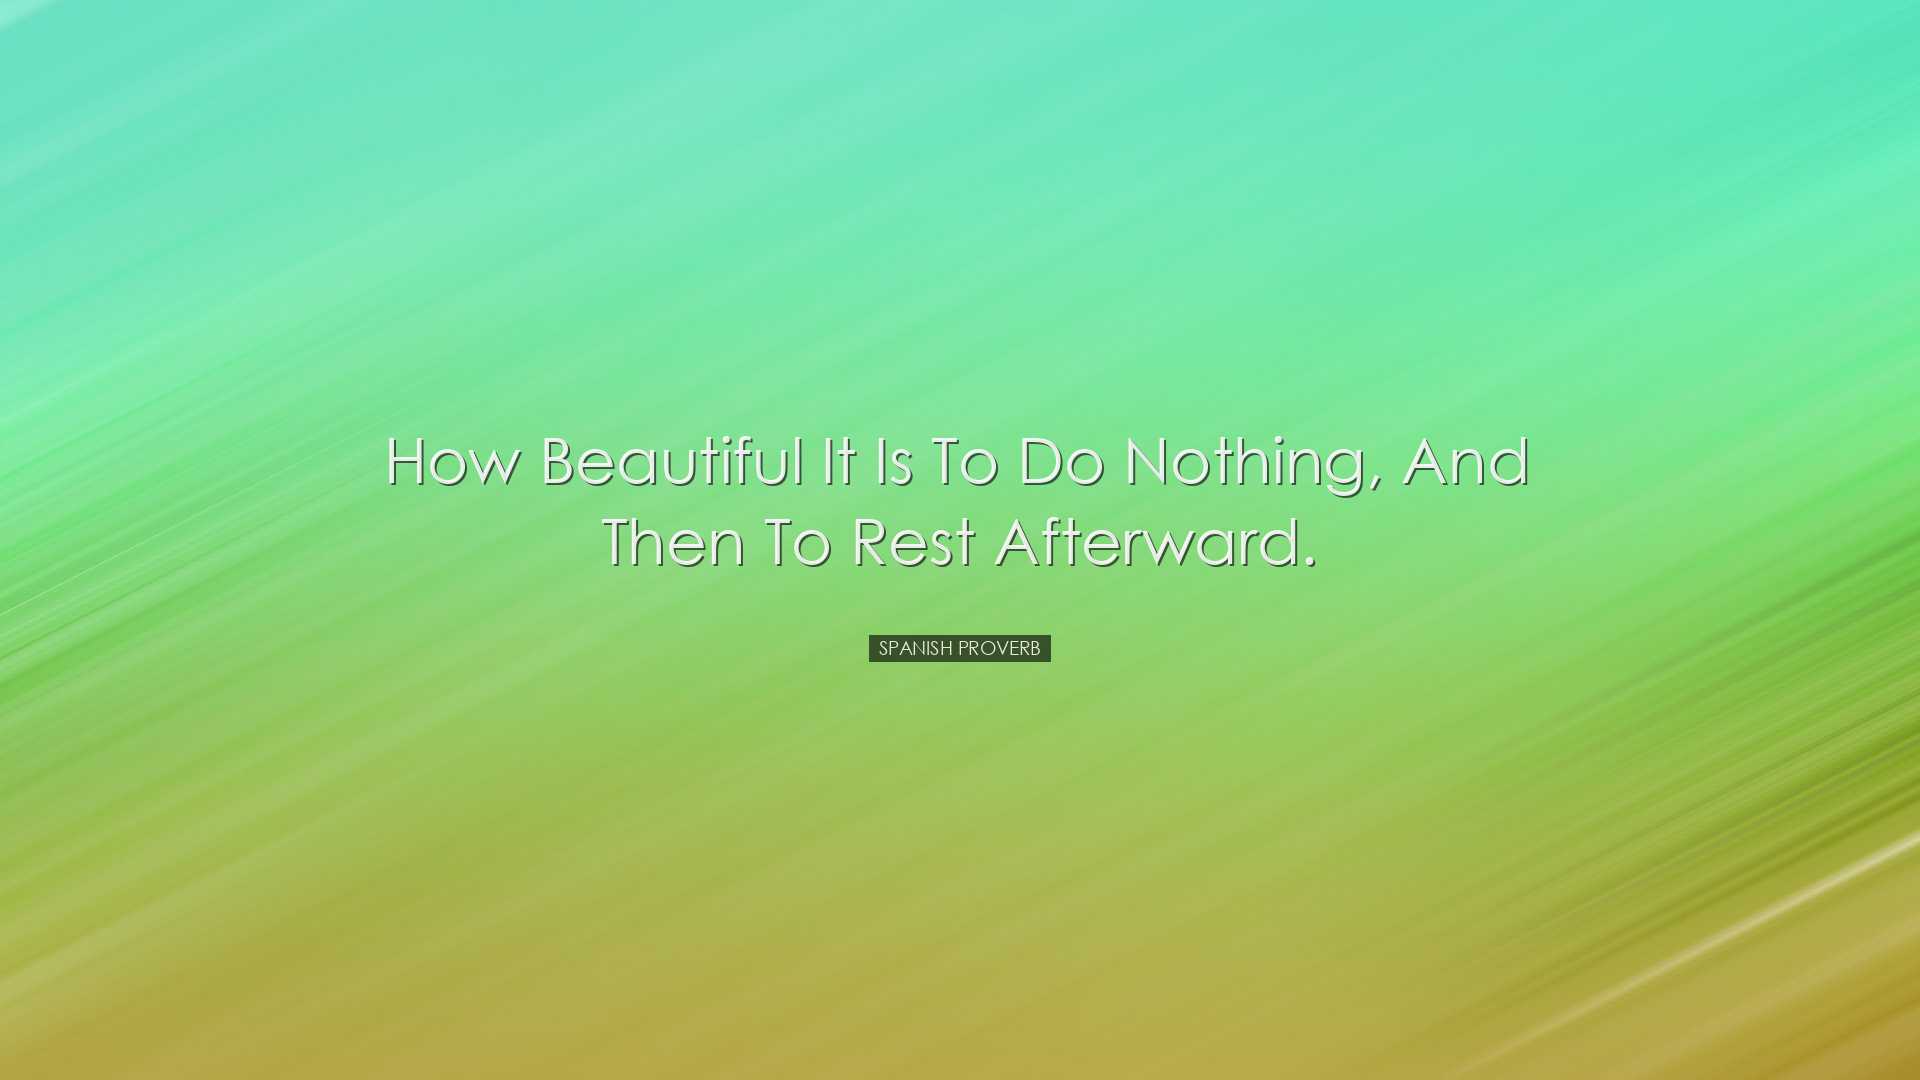 How beautiful it is to do nothing, and then to rest afterward. - S